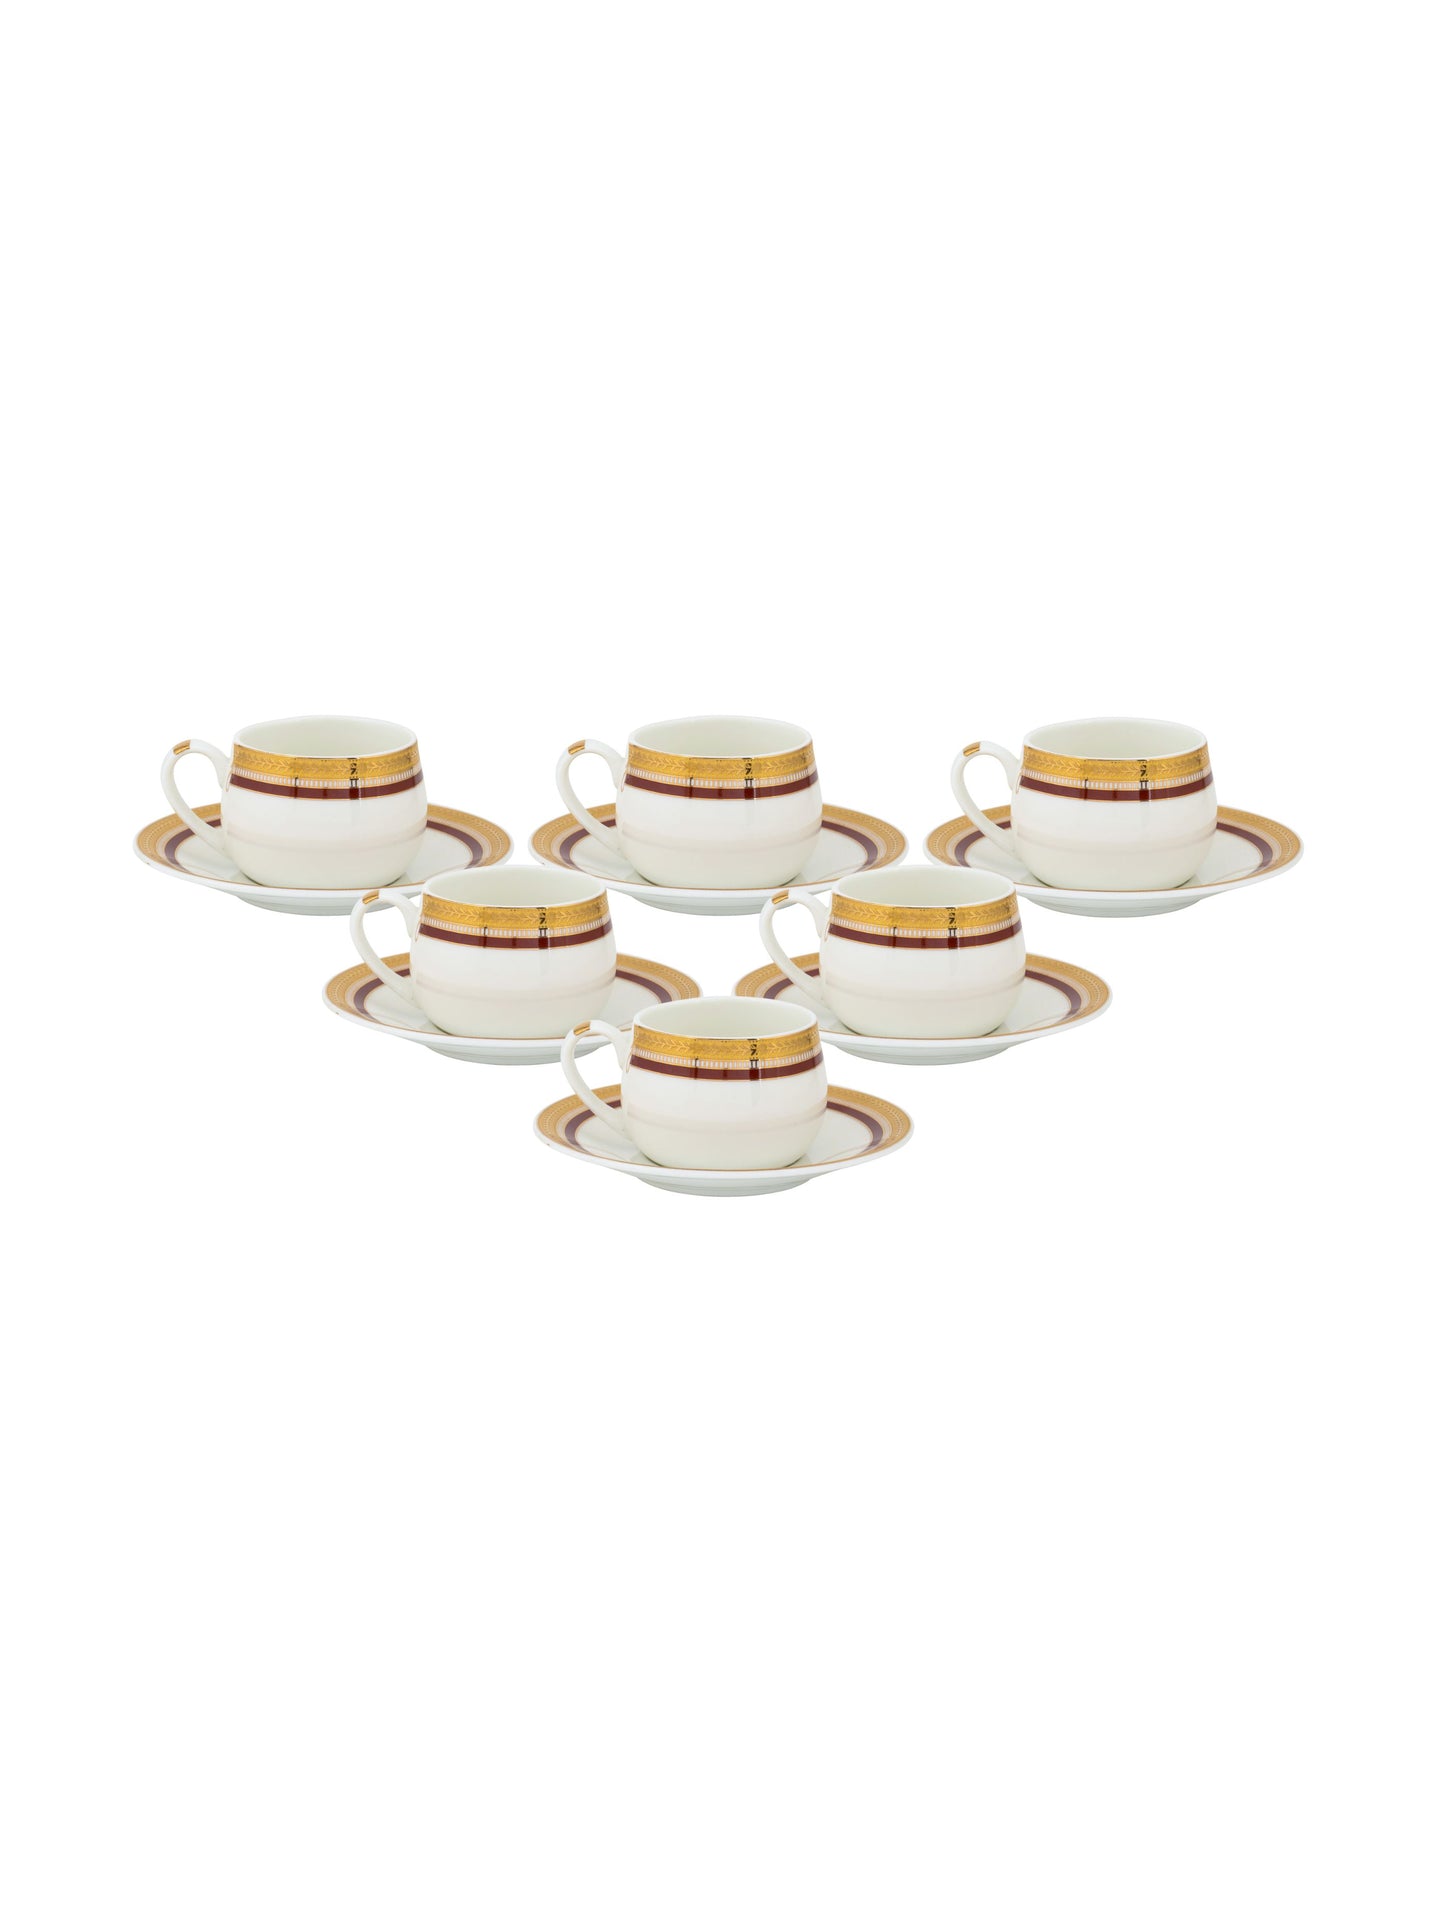 JCPL Coral Aroma Cup & Saucer, 145ml, Set of 12 (6 Cups + 6 Saucers) (AS3)